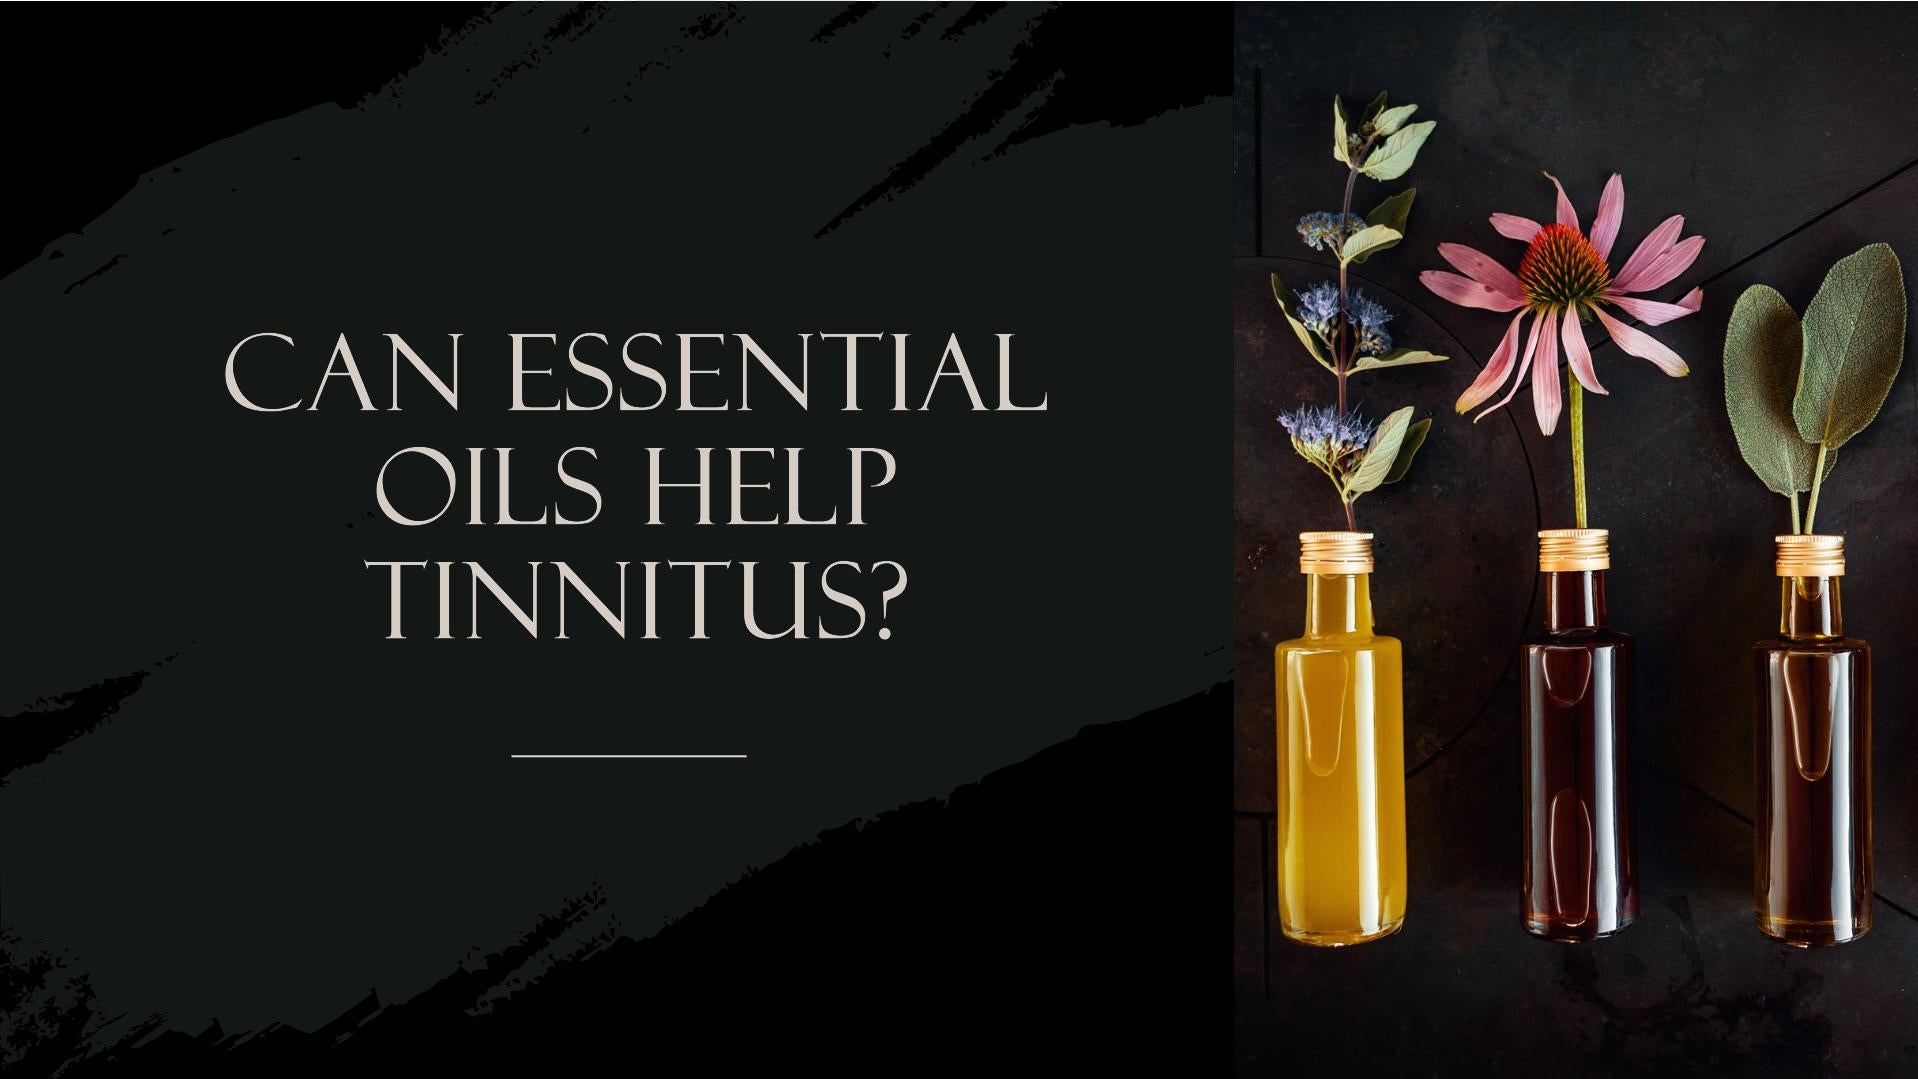 Can Essential Oils Help Tinnitus?